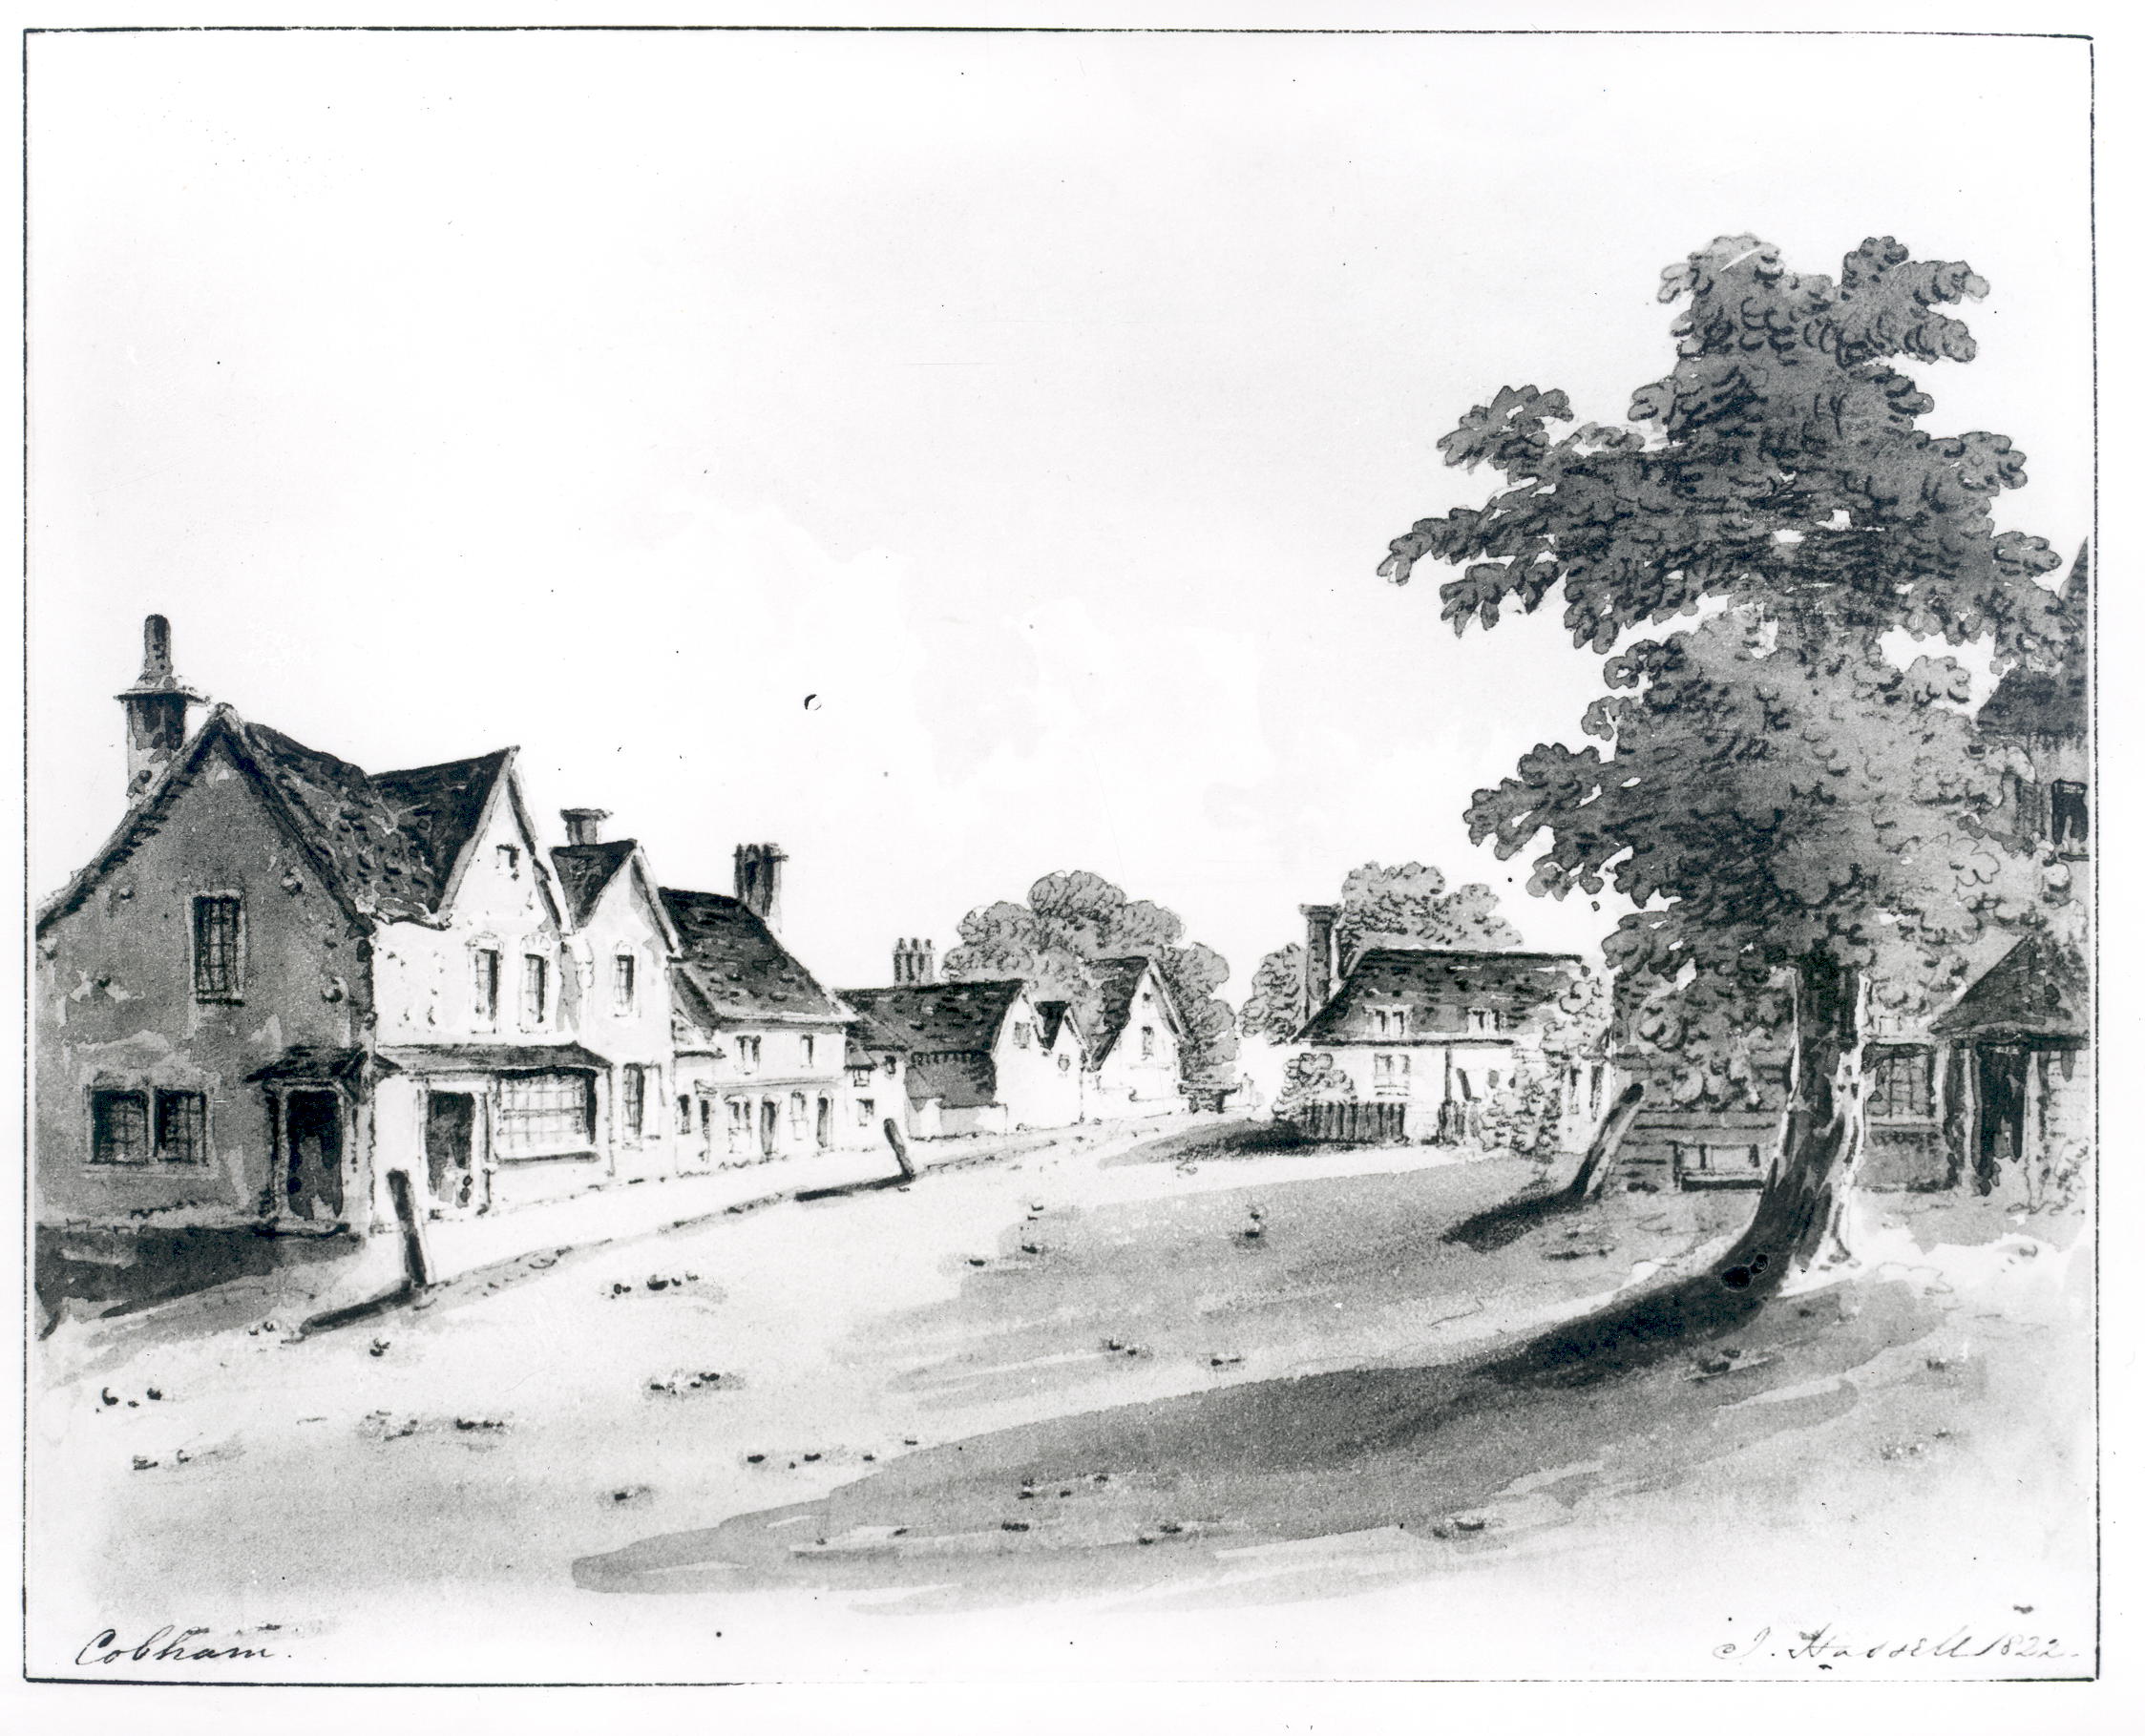 A sketch of Church Cobham, by J. Hassell, c.1800s, around 200 years after the Digger Movement. This was the community with which the Diggers had many personal links.